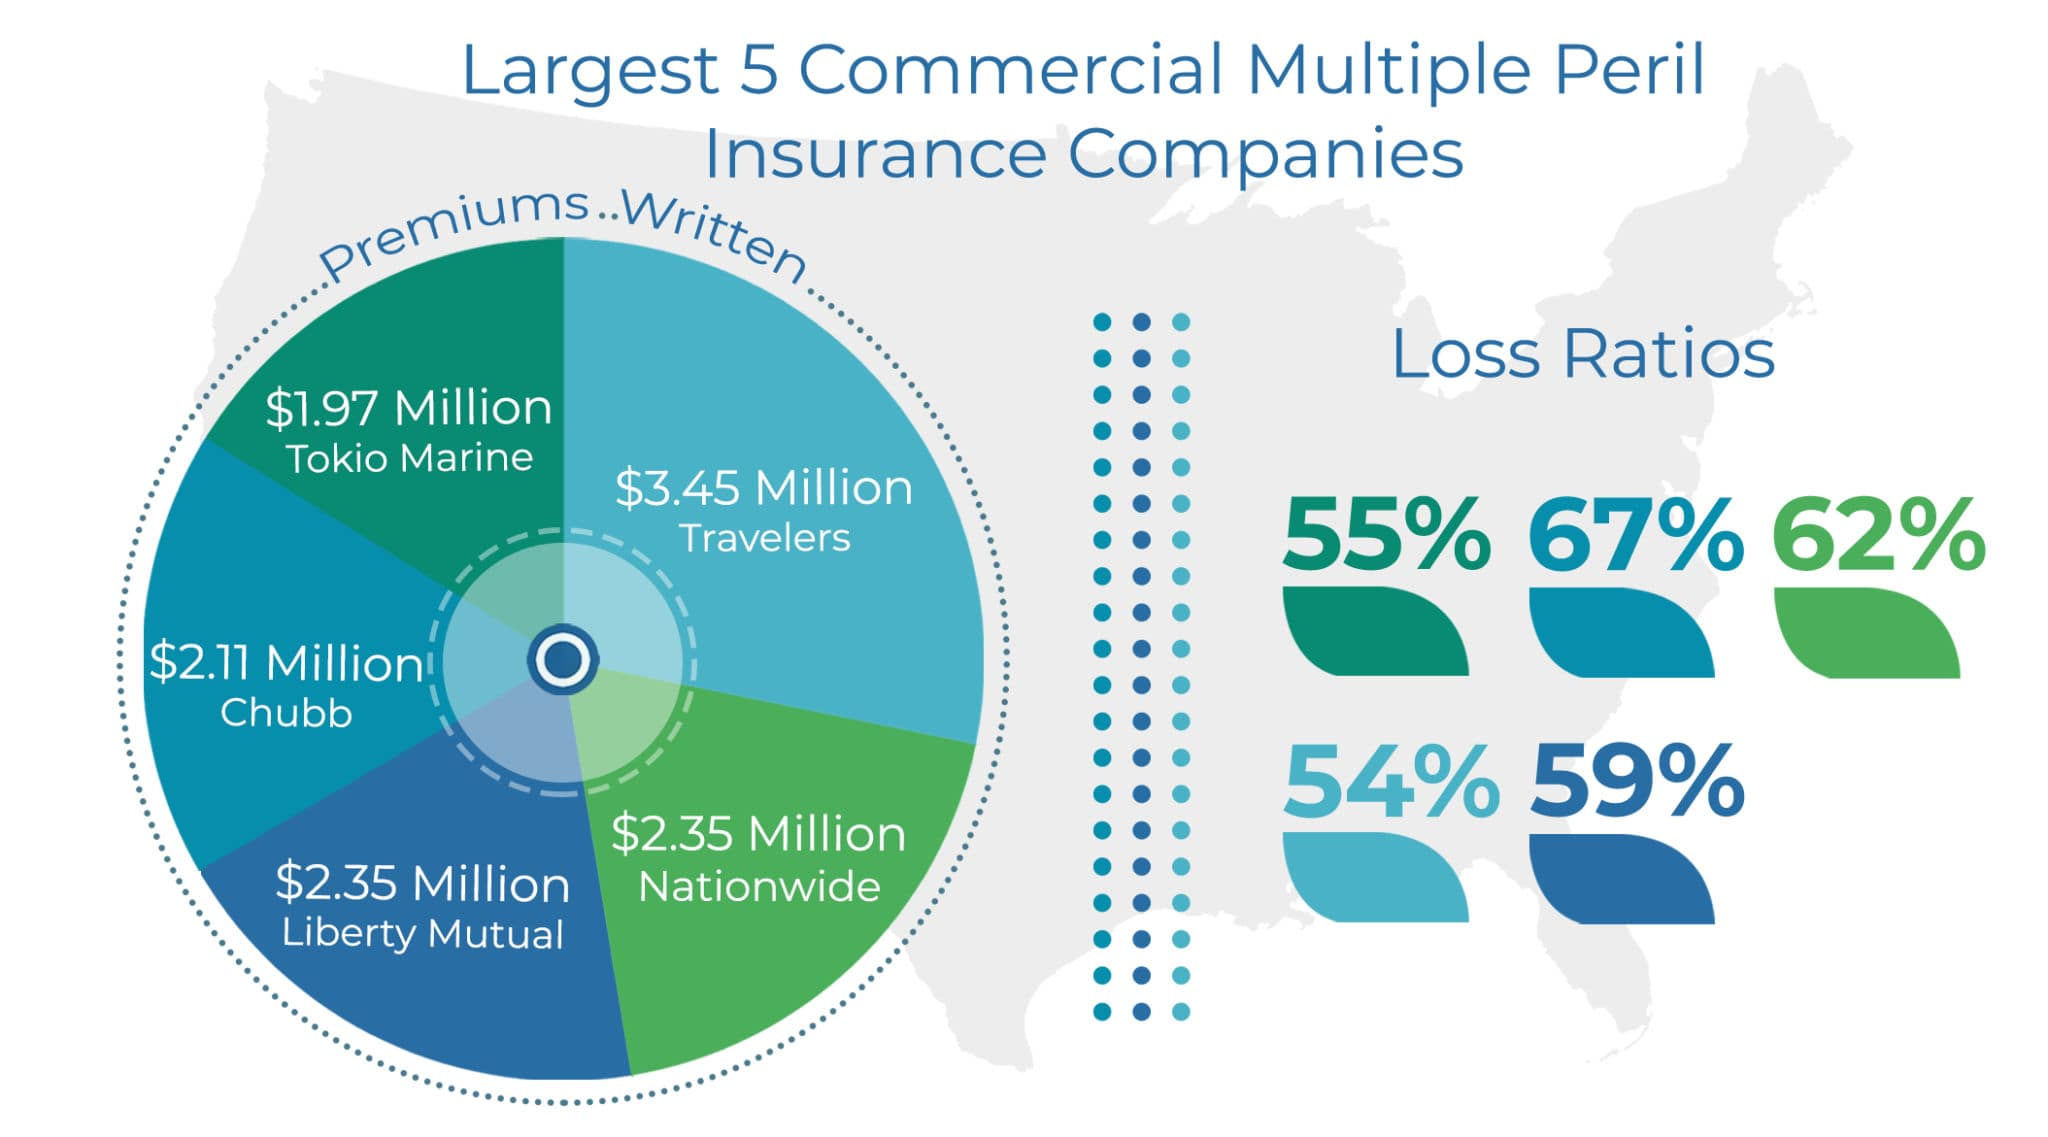 largest five companies for commercial multiple peril insurance by premiums written and loss ratios